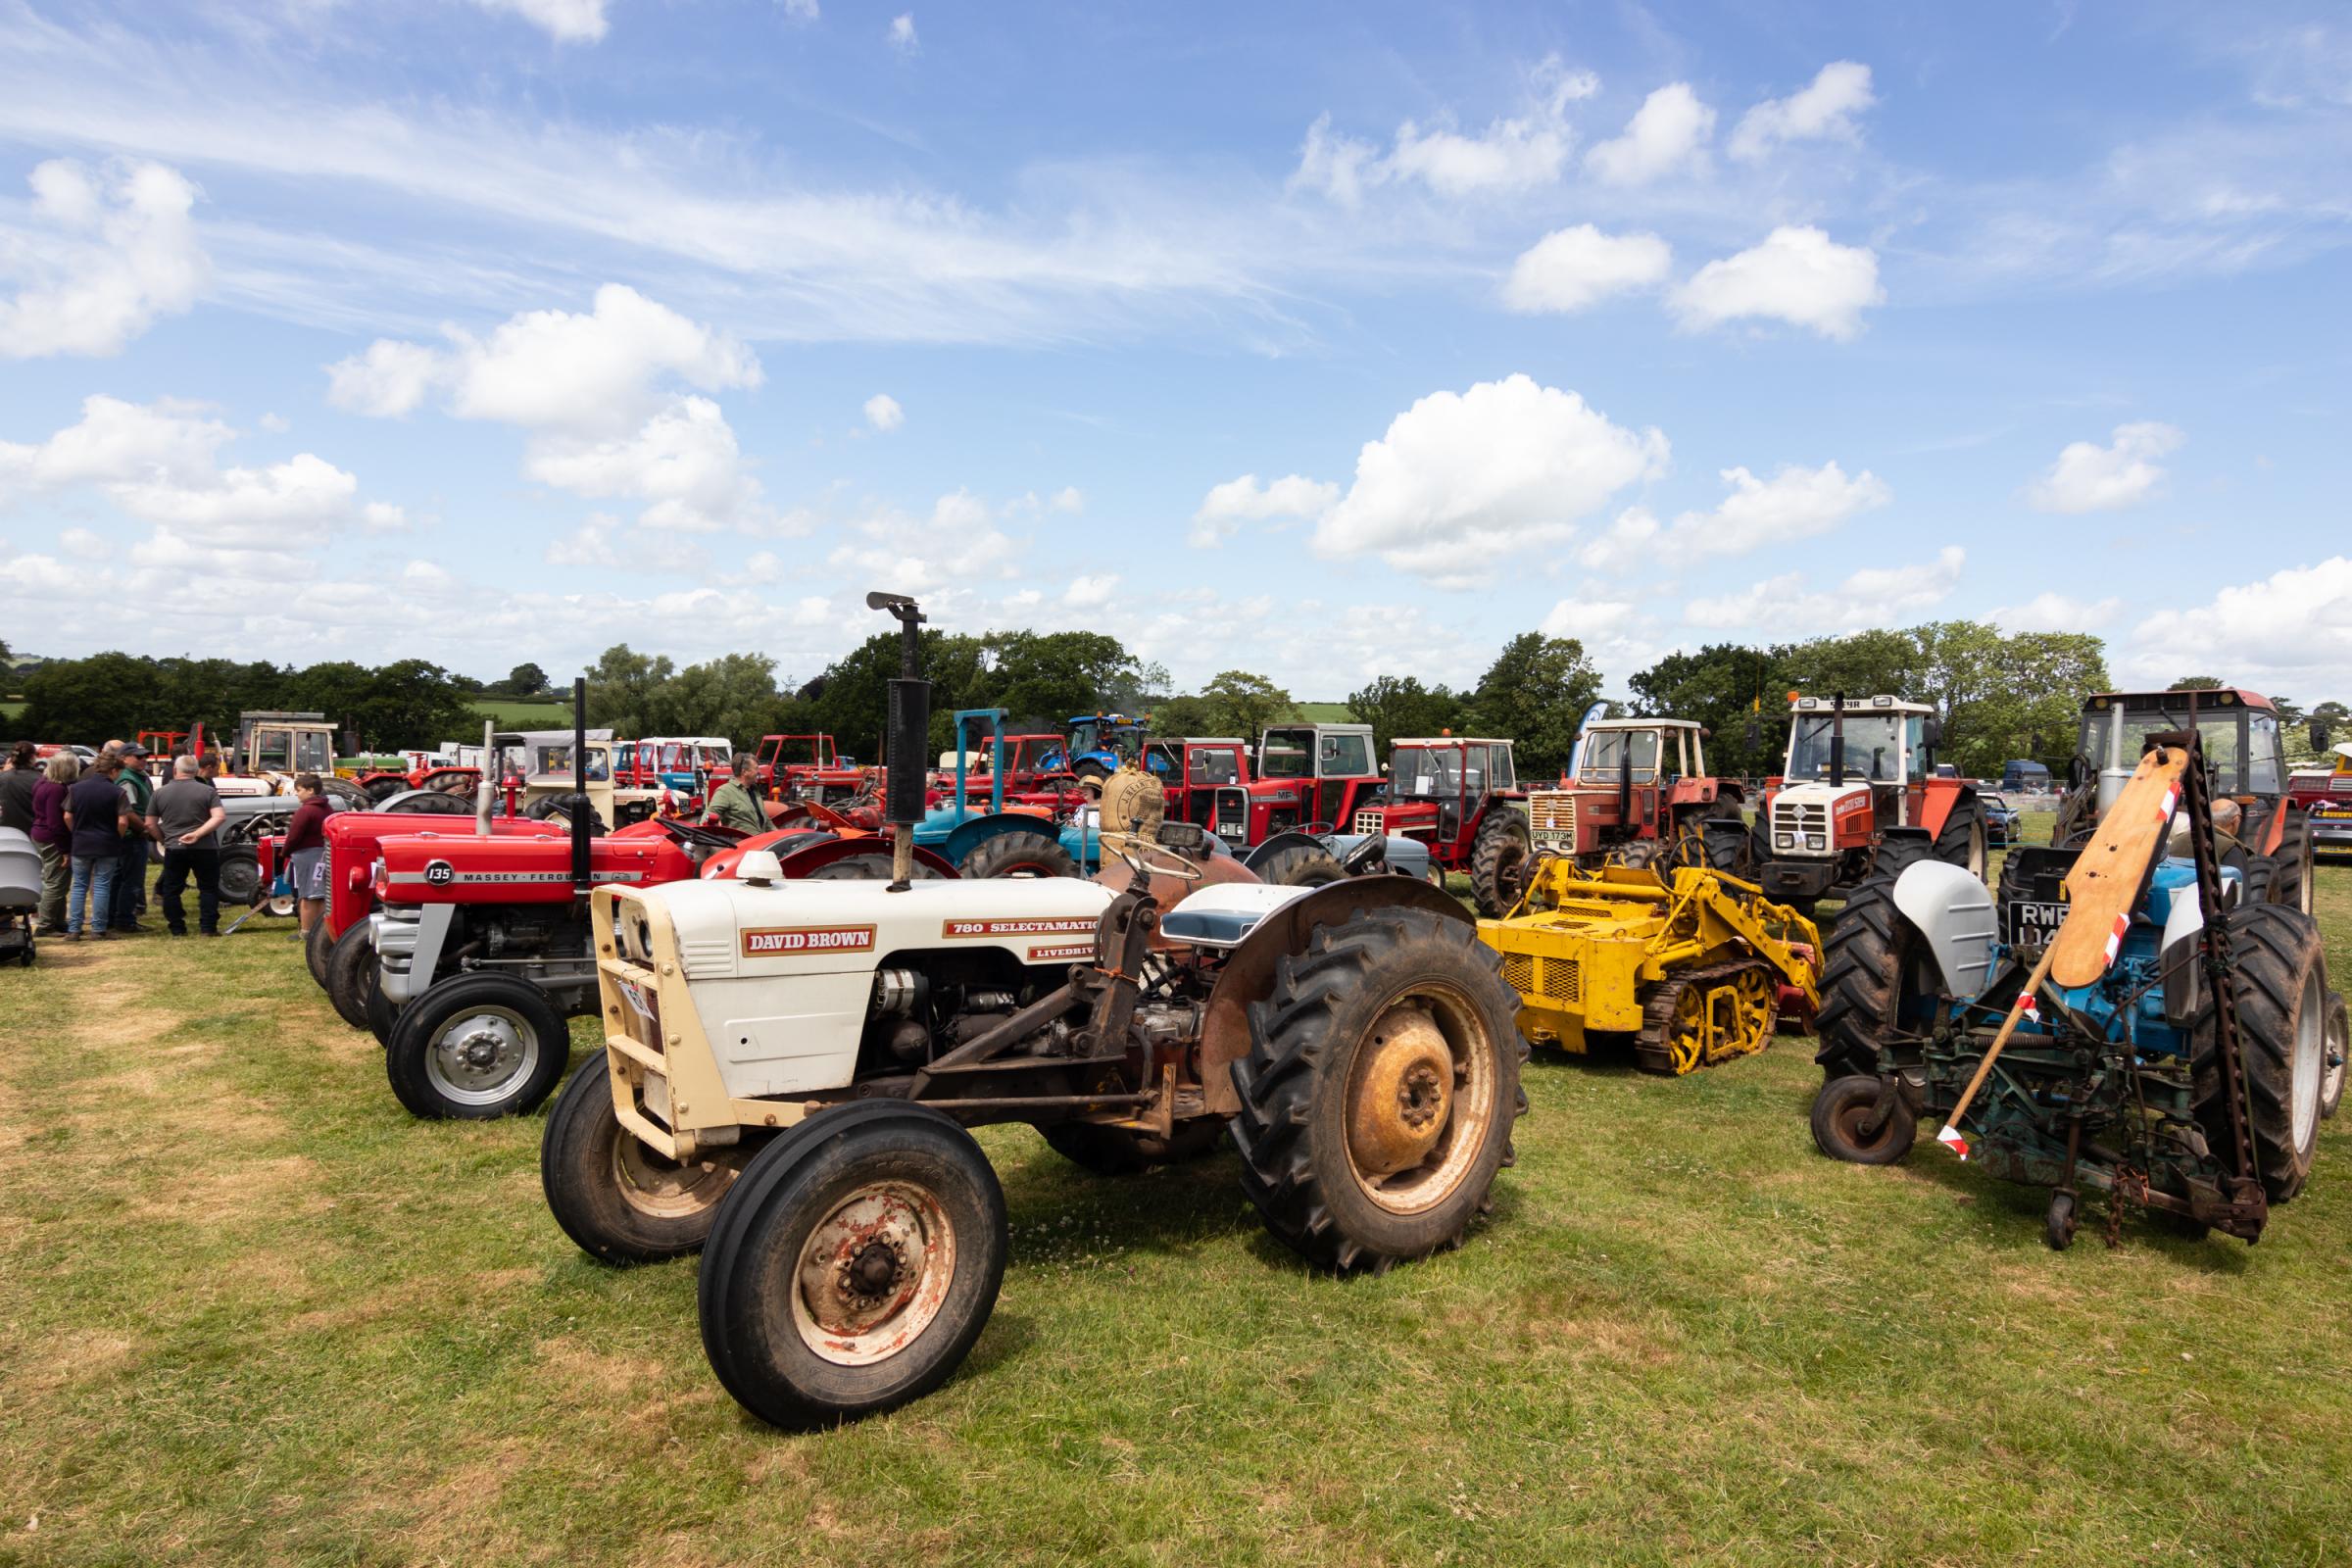 David Brown tractors were also among those at the Bromyard Gala 2022. Picture: Sofie Smith